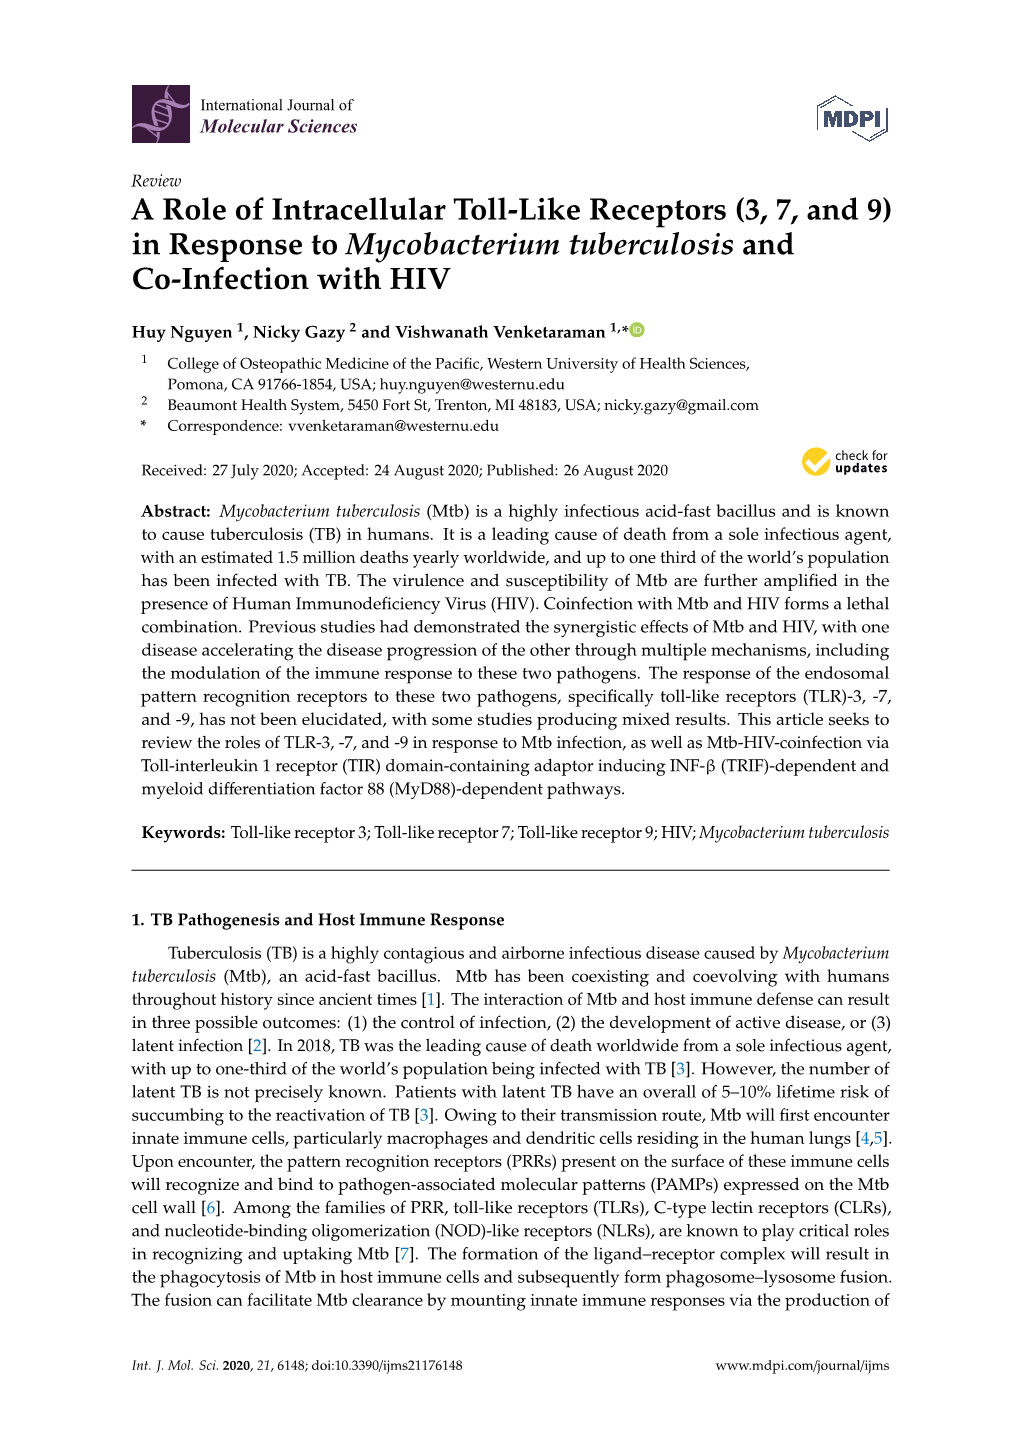 A Role of Intracellular Toll-Like Receptors (3, 7, and 9) in Response to Mycobacterium Tuberculosis and Co-Infection with HIV